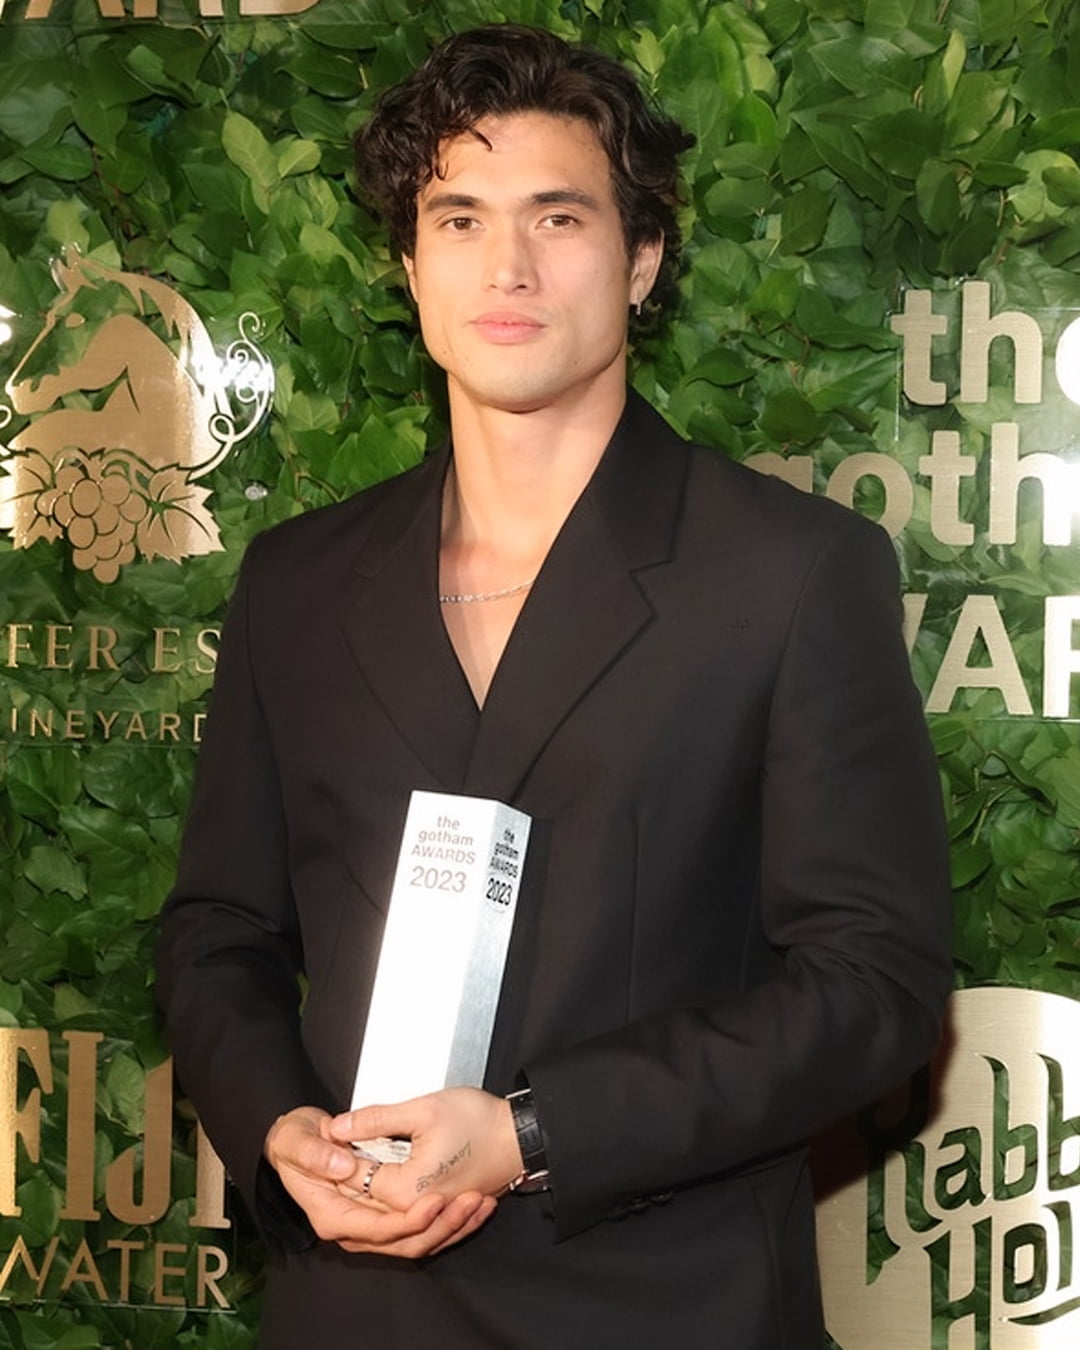 Korean Hollywood actor Charles Melton, from the movie 'May December', won the Best Supporting Actor Award at the 33rd Gotham Awards.